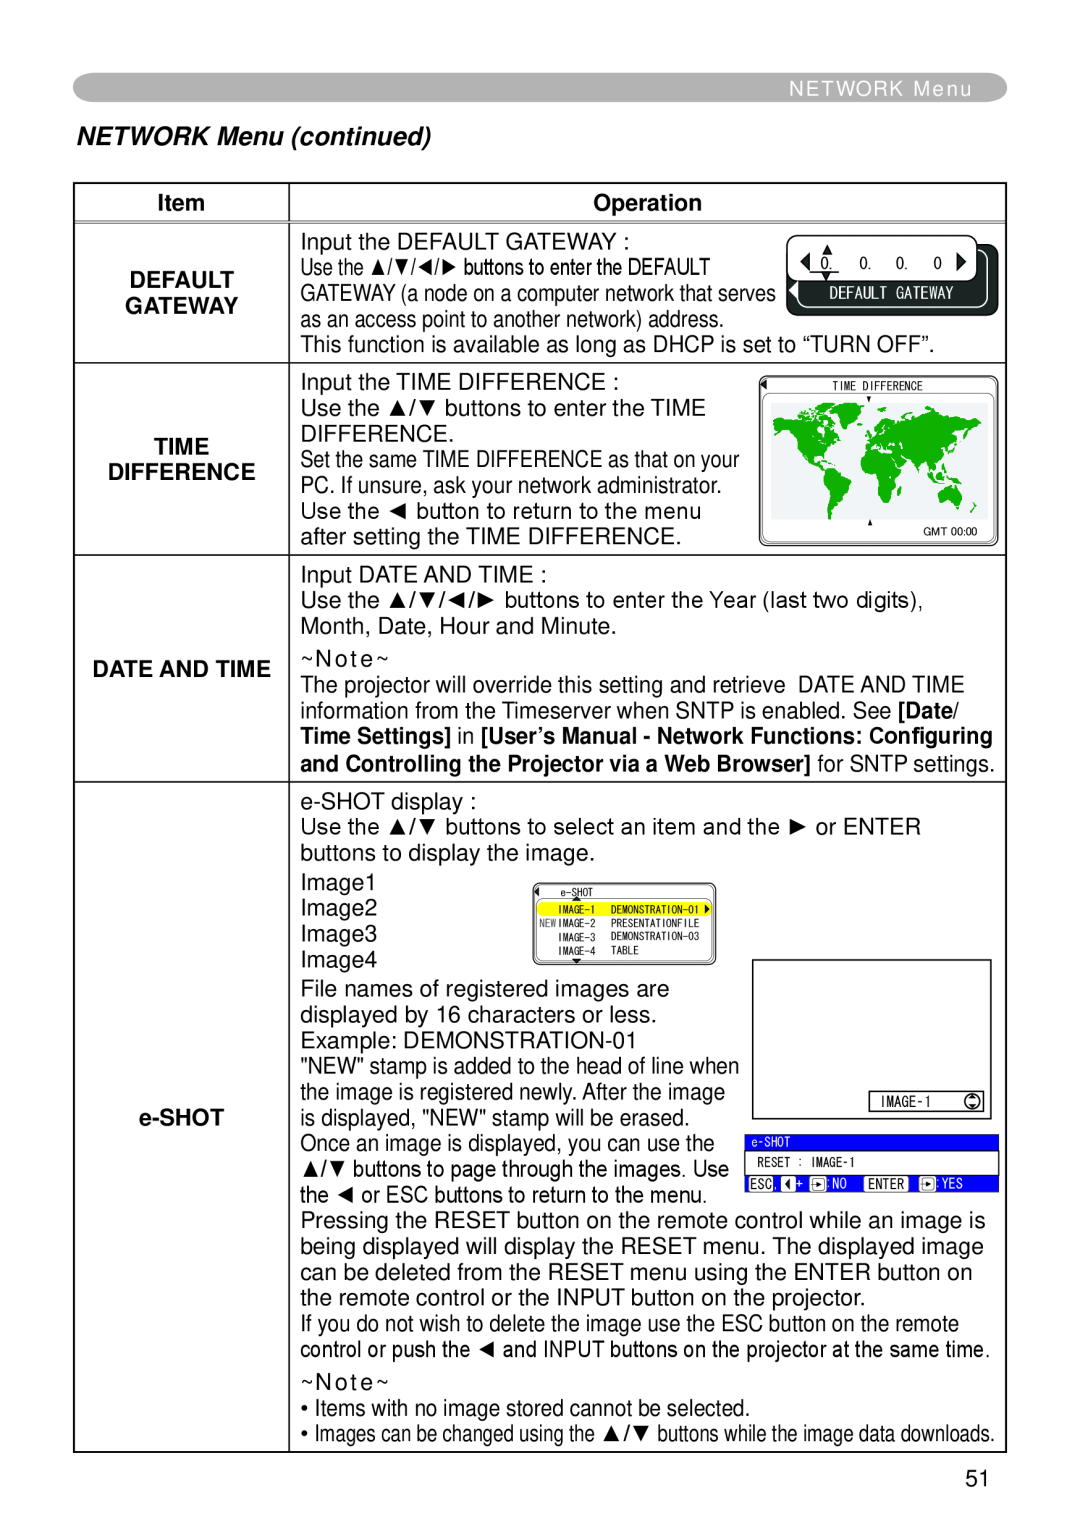 Hitachi CP-X265 NETWORK Menu continued, Operation, Default, Gateway, Difference, Date And Time, ~Note~, e-SHOT 